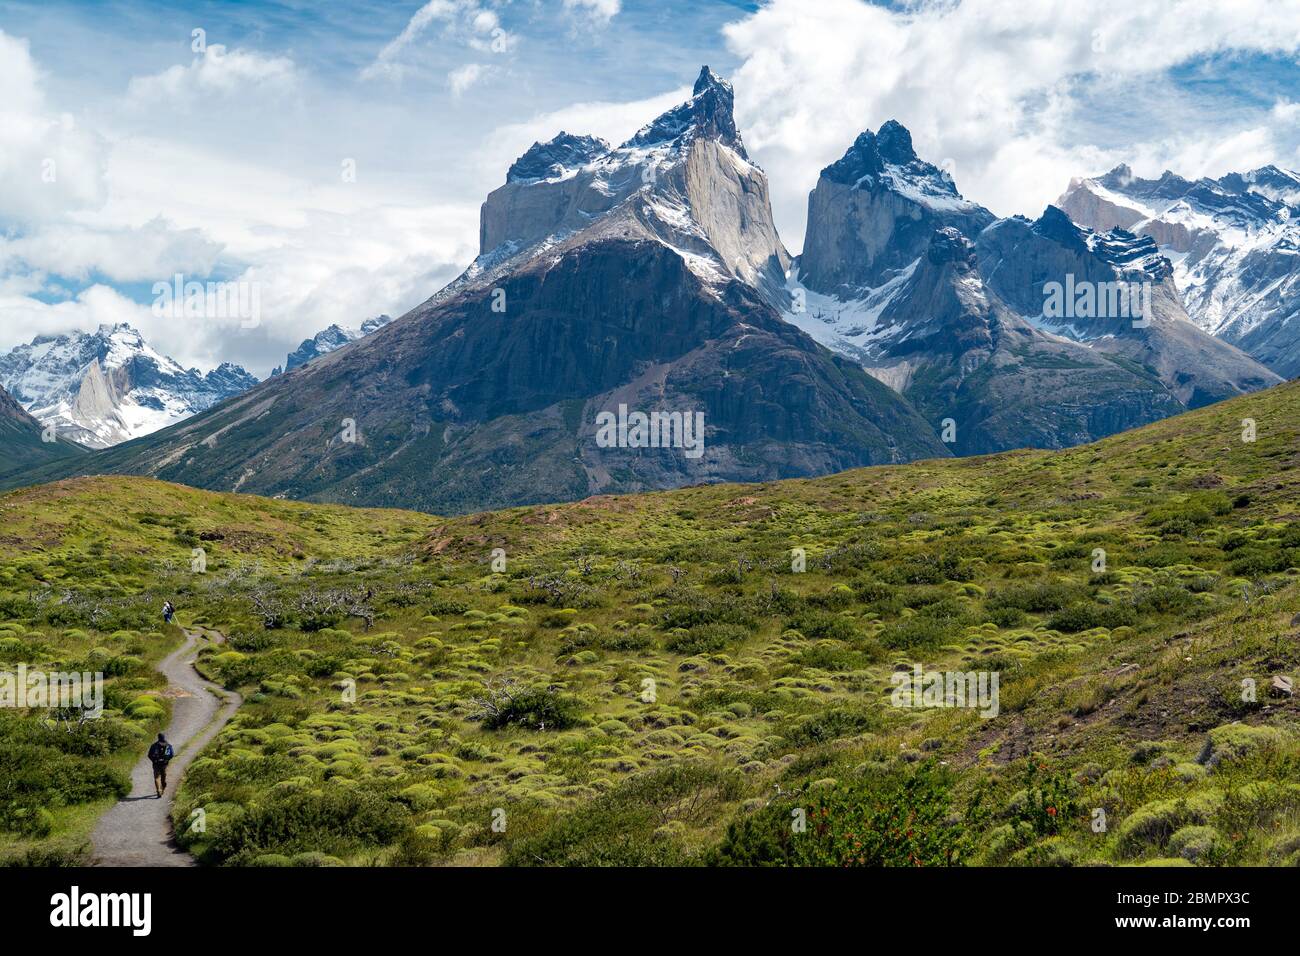 Hiker in Torres del Paine National Park in Chile with the iconic Cuernos del Paine mountains in the background, Patagonia, South America. Stock Photo